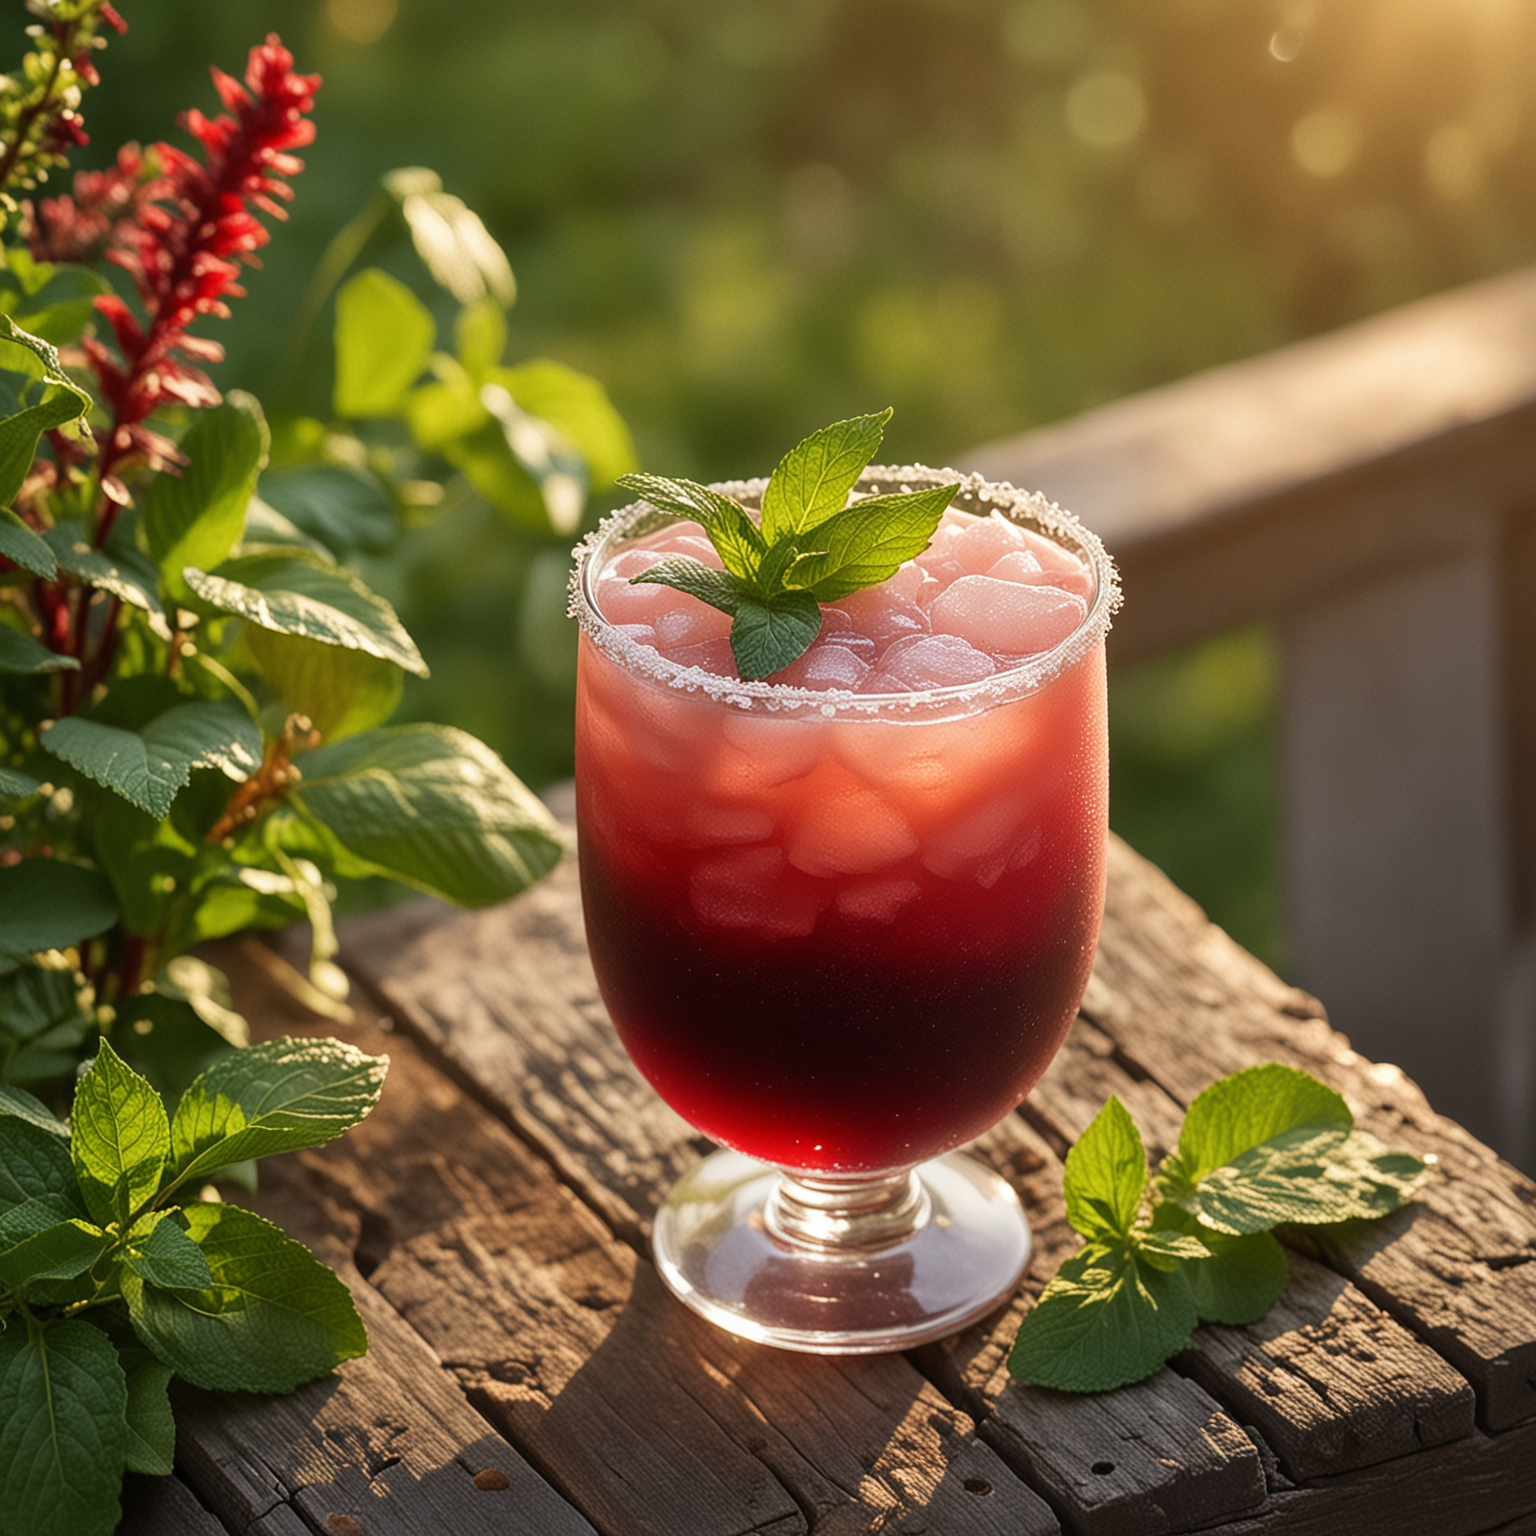 Escape the heat with this elegant Red Wine Slushie! Perfect for sunny days and starlit evenings alike. 🍷❄️✨, A crystal-clear glass filled to the brim with a frozen red wine slushie, garnished with a sprig of mint and a slice of lime, sitting atop a rustic outdoor wooden table, surrounded by a lush green garden in full bloom under the golden glow of a setting sun, The scene evokes a sense of relaxation and refreshment, perfect for winding down after a hot day, Photography, taken with a DSLR camera, macro lens 85mm, f/1.8 aperture for a sharp focus on the slushie with a beautifully blurred background, --ar 16:9 --v 5